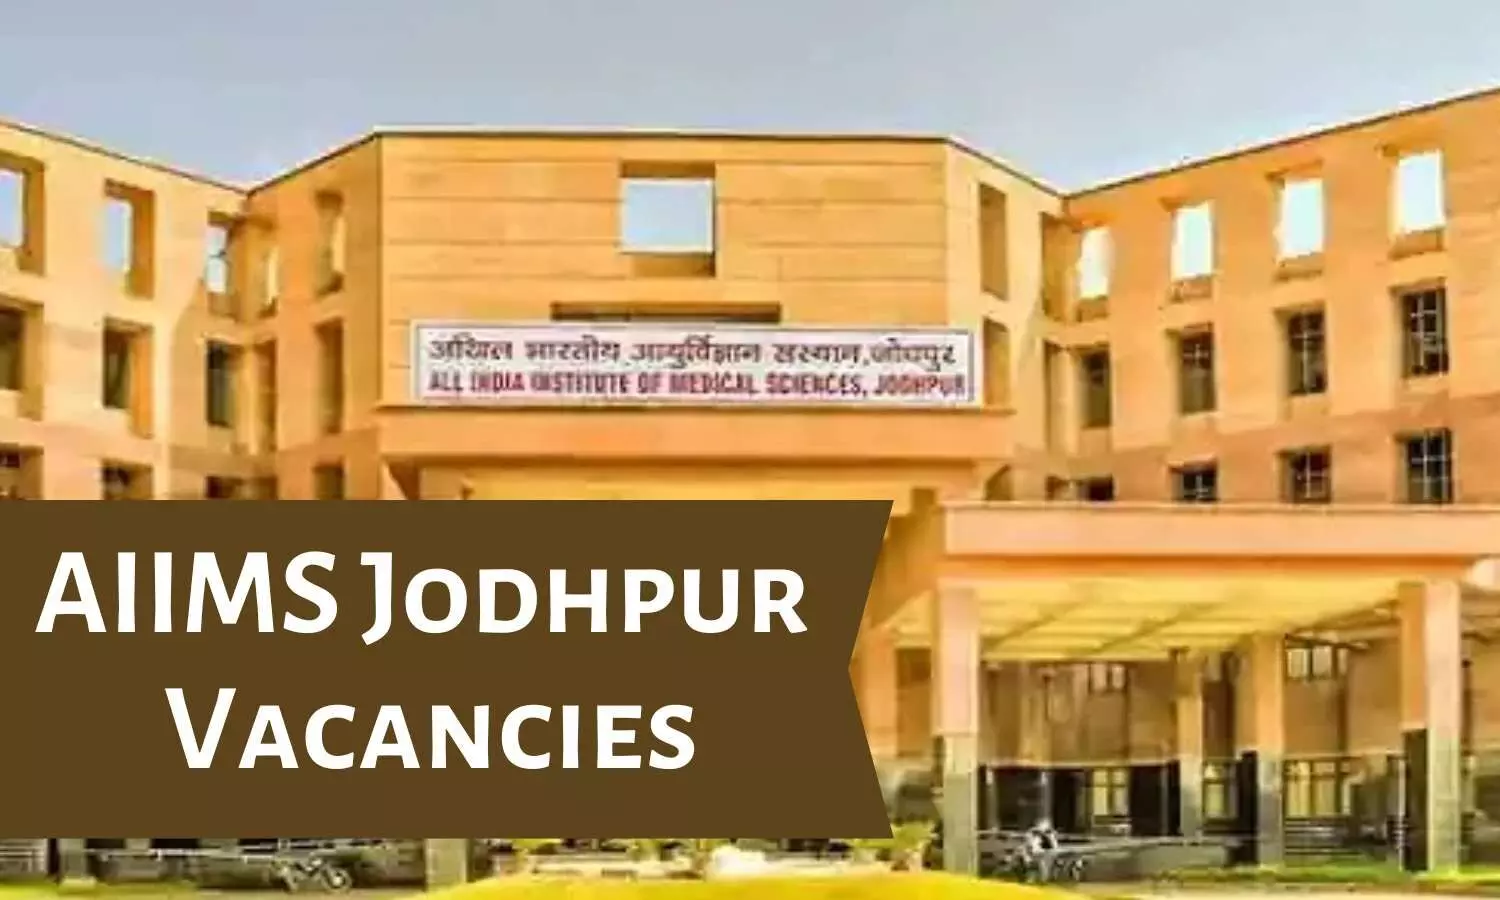 46 Vacancies For SR Post: Walk In Interview At AIIMS Jodhpur, View All Details Here